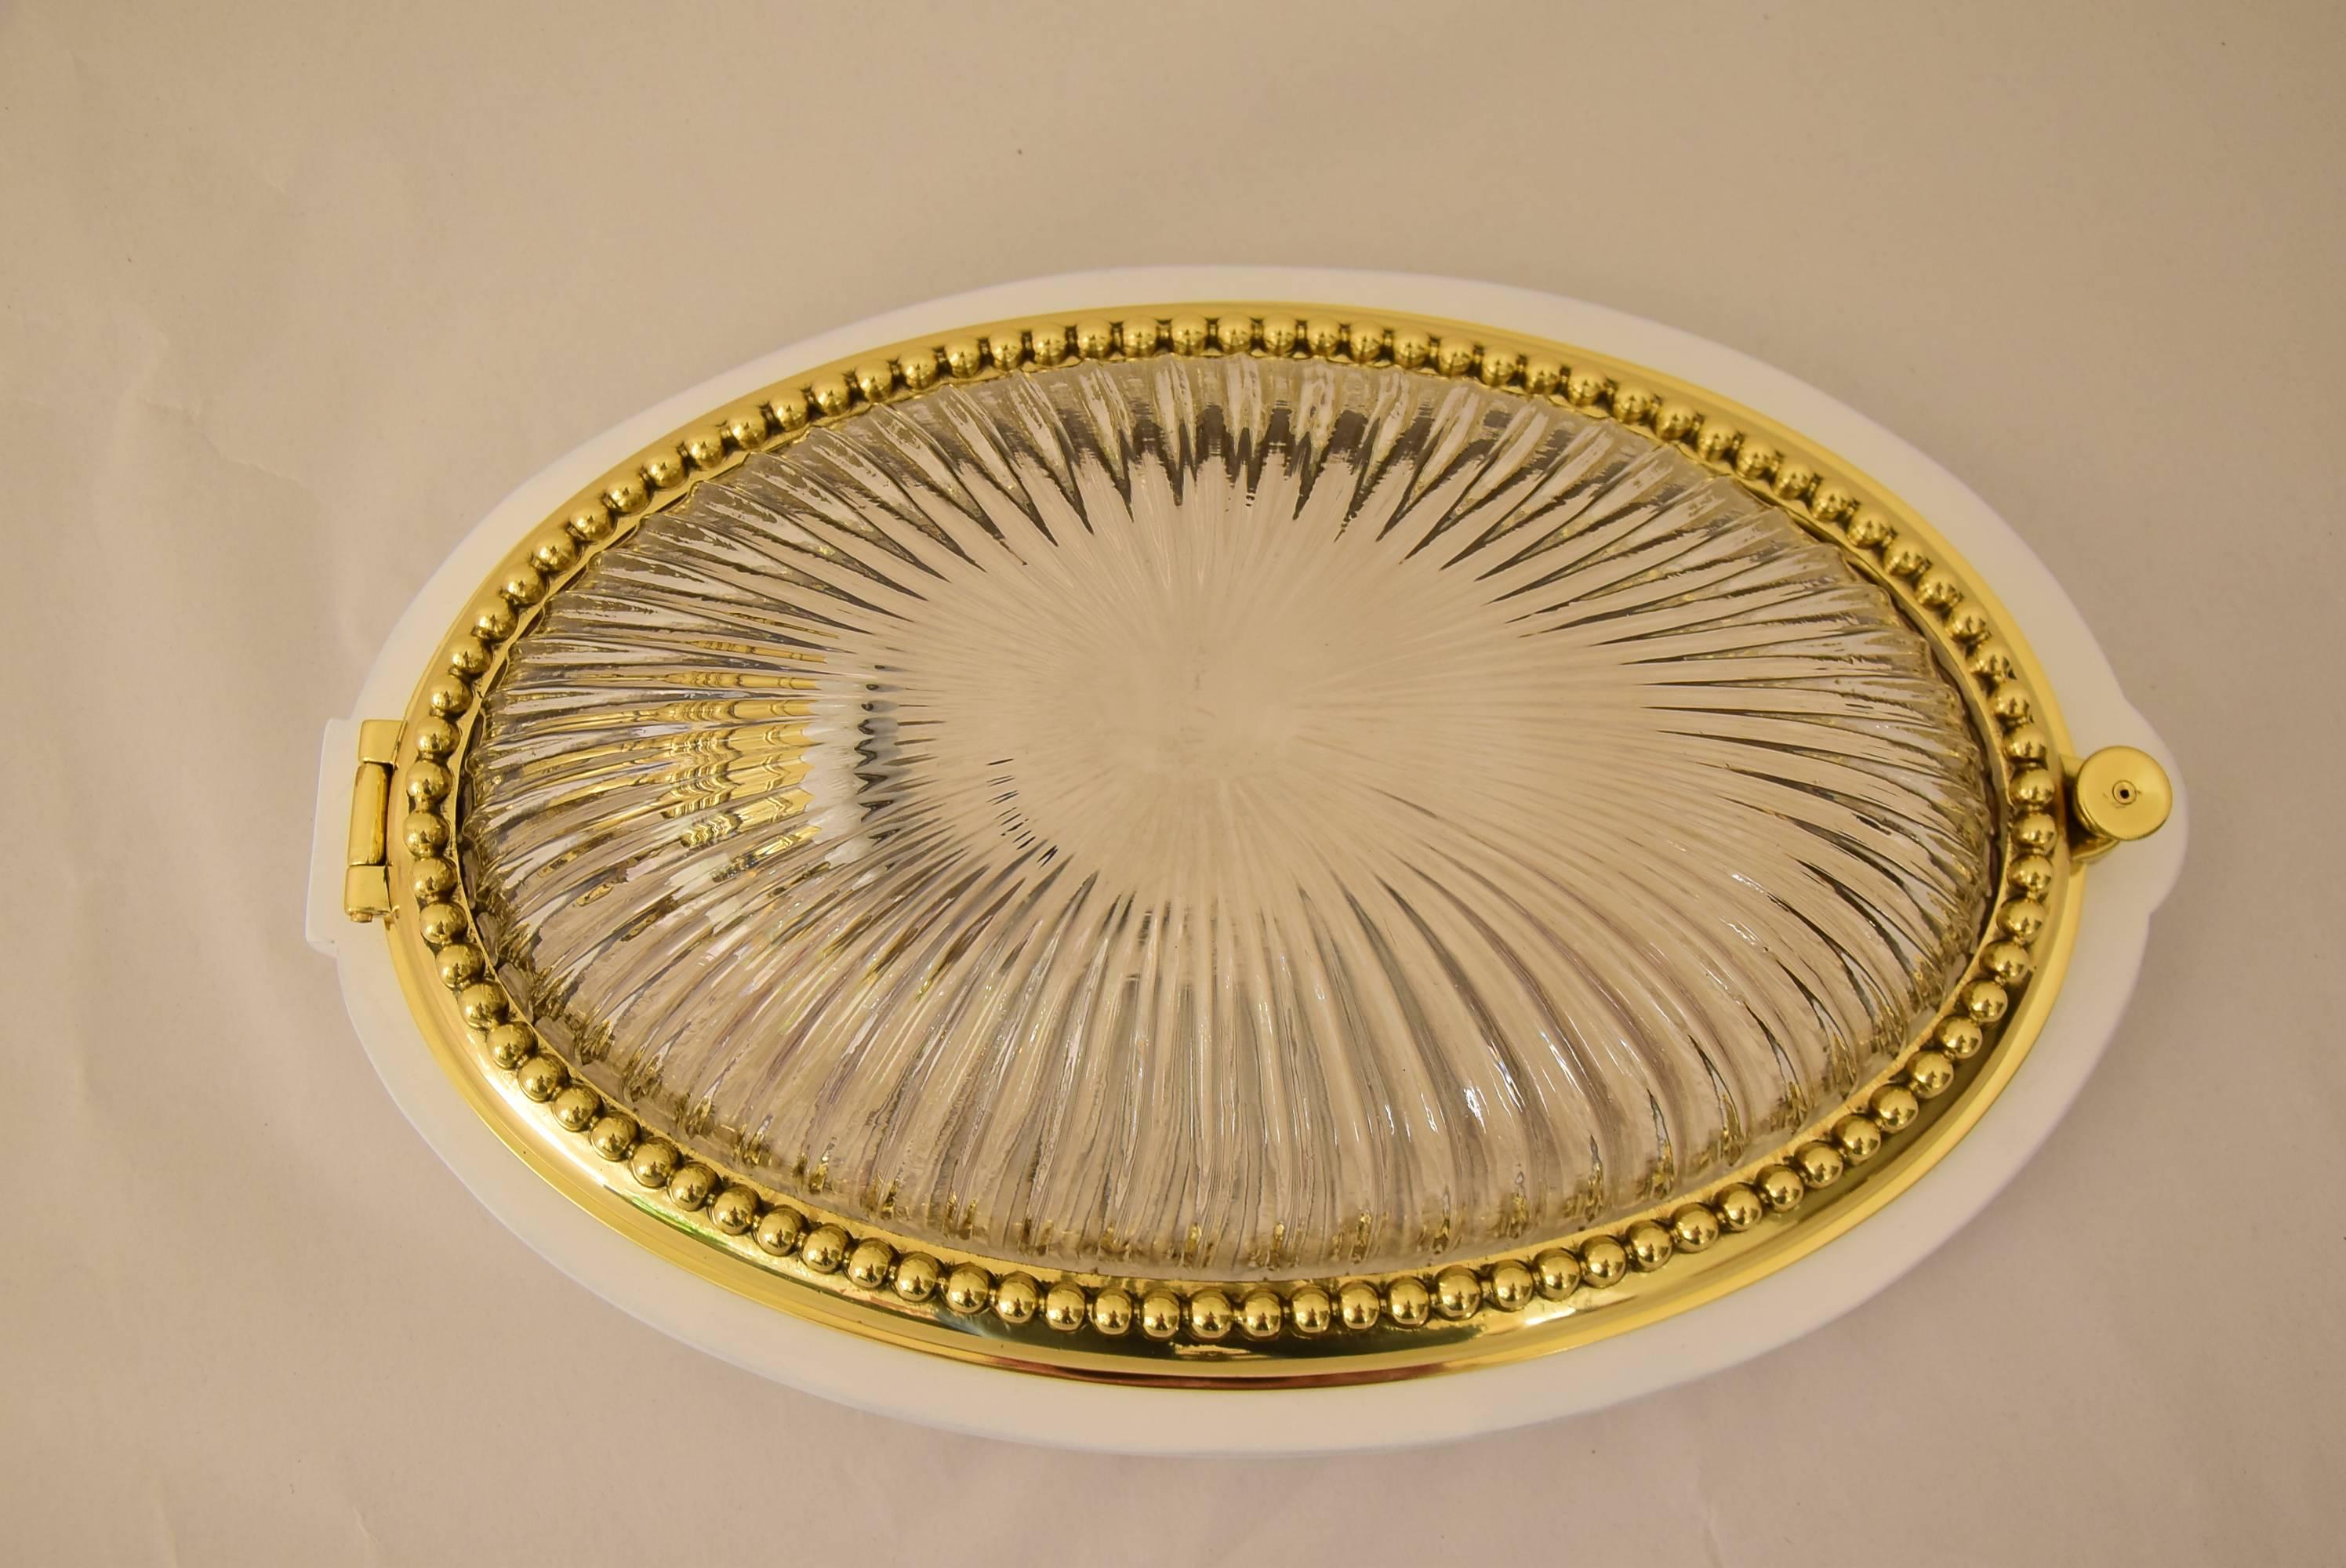 Jugendstil oval ceiling lamp with hinge and cut glass.
Wood plate is white painted.
Brass is polished and stove enamelled.